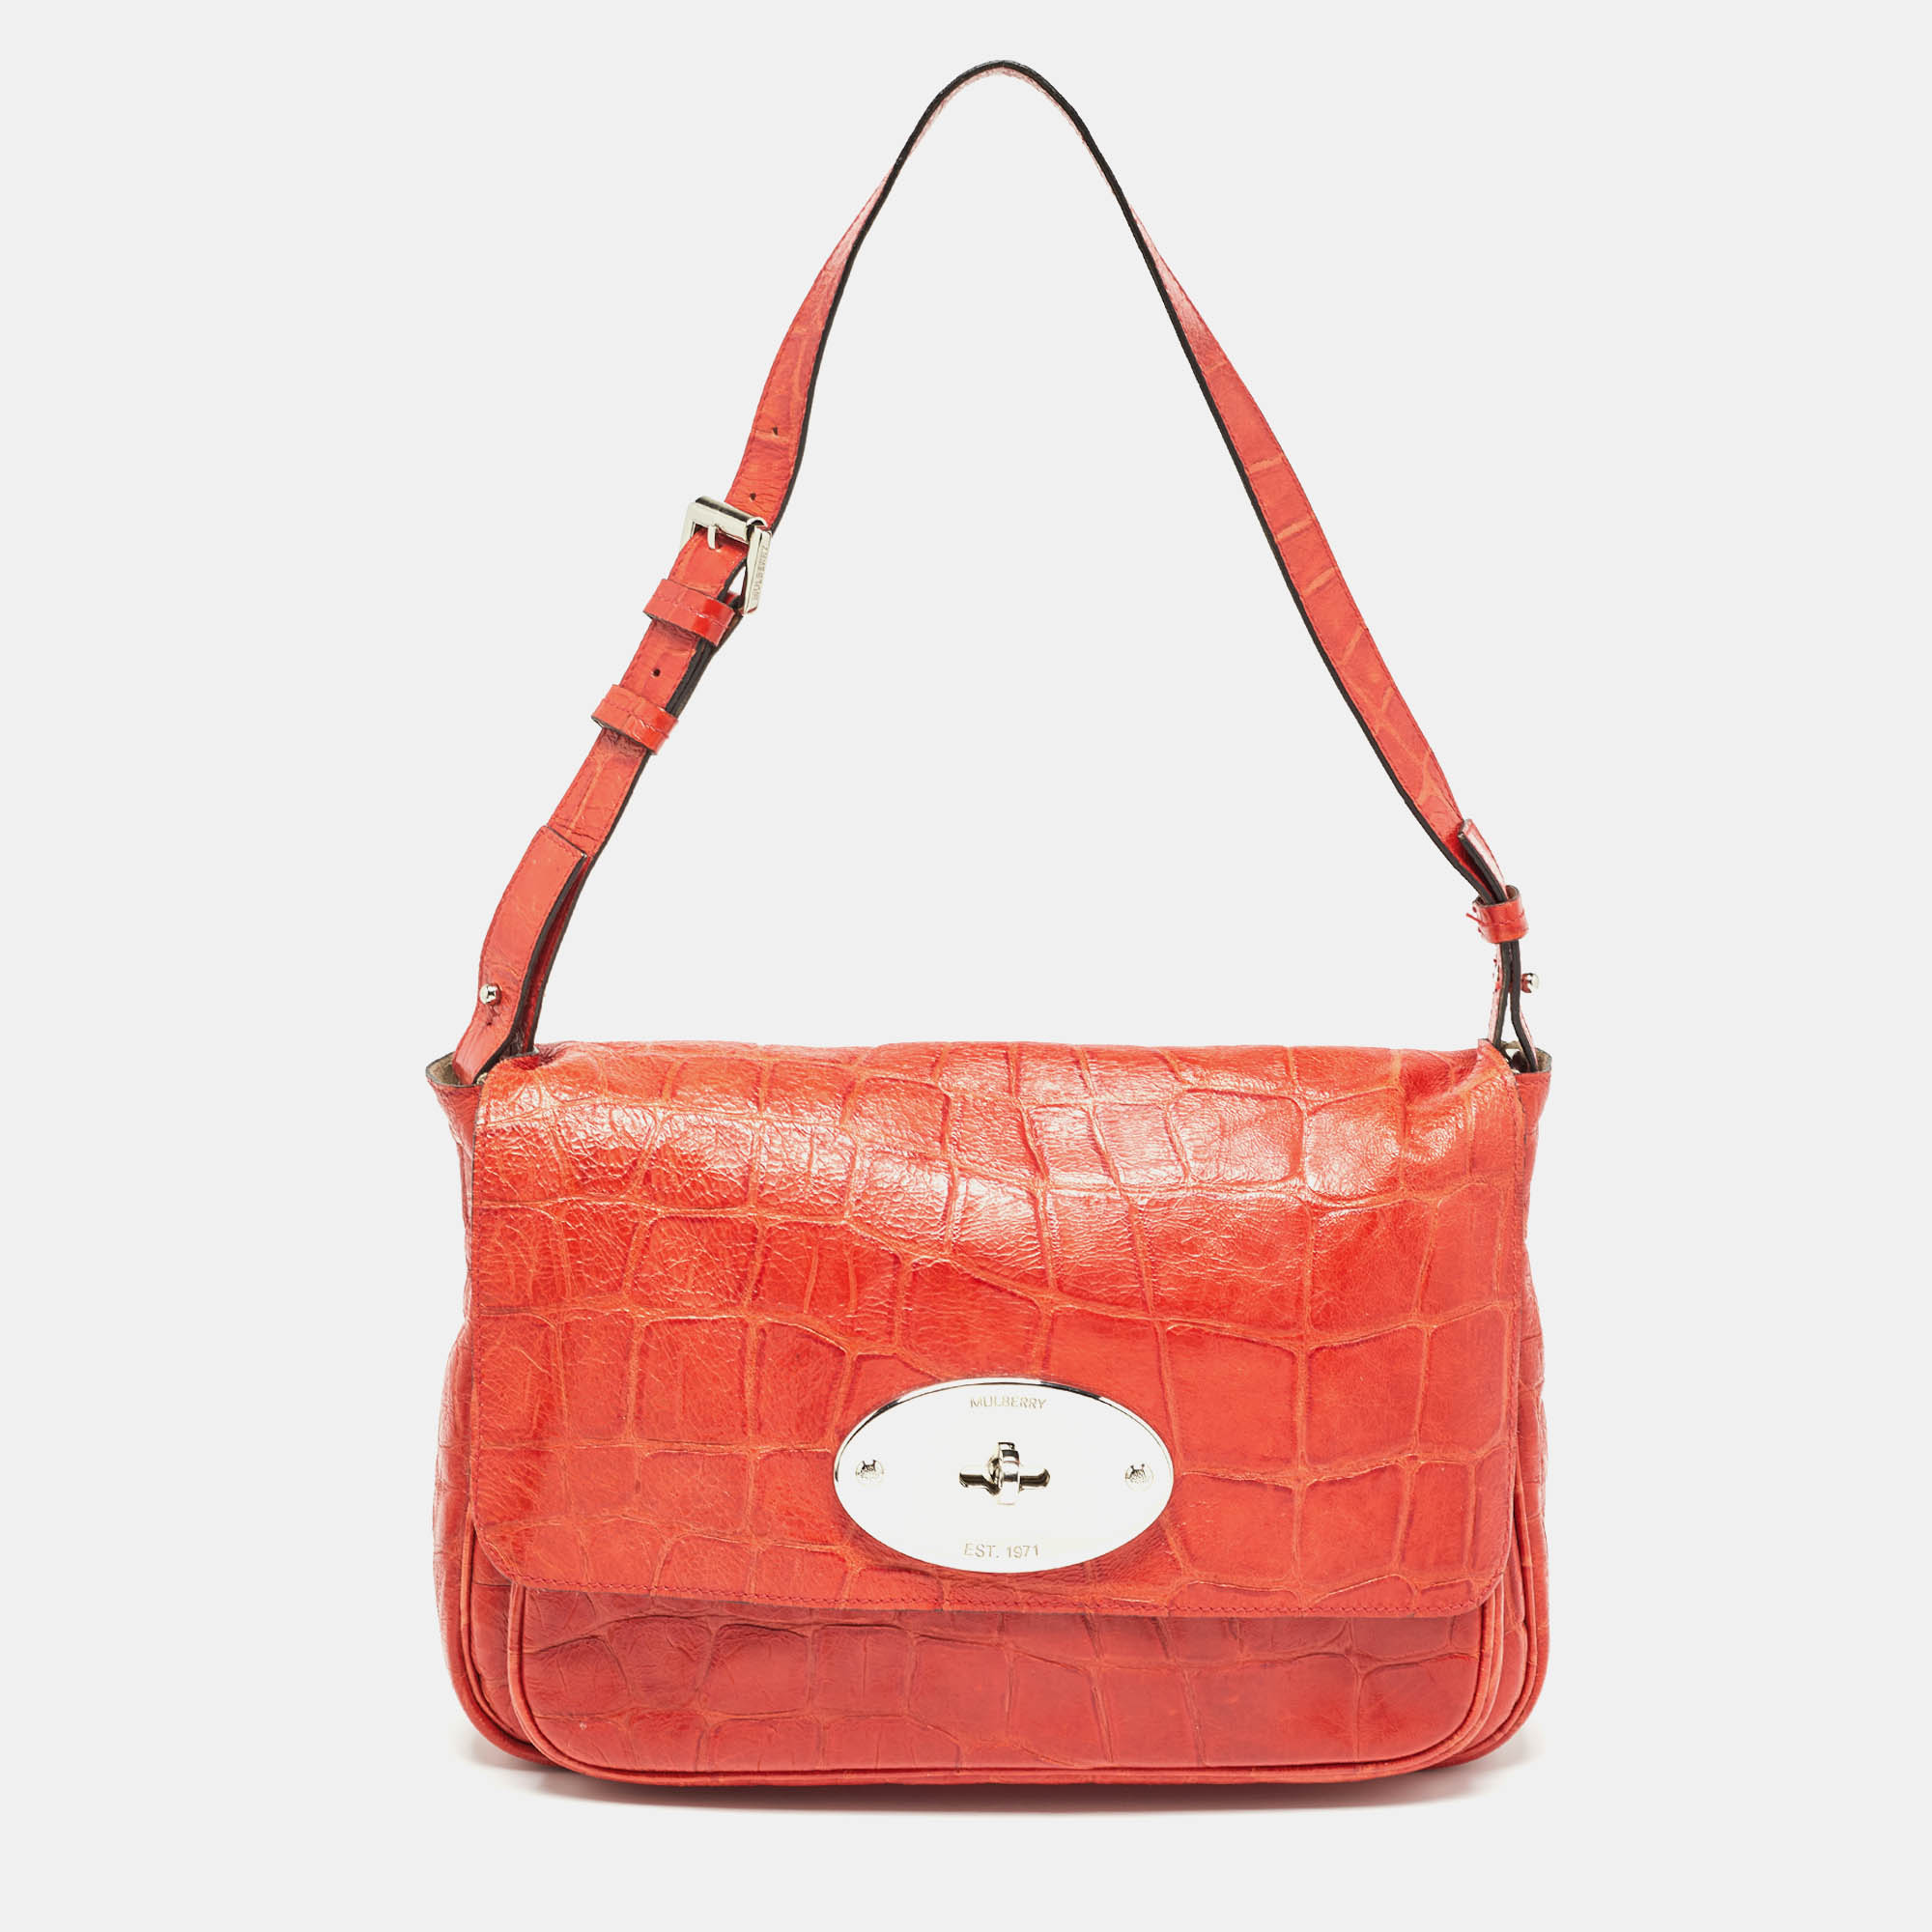 Mulberry coral red croc embossed leather shoulder bag